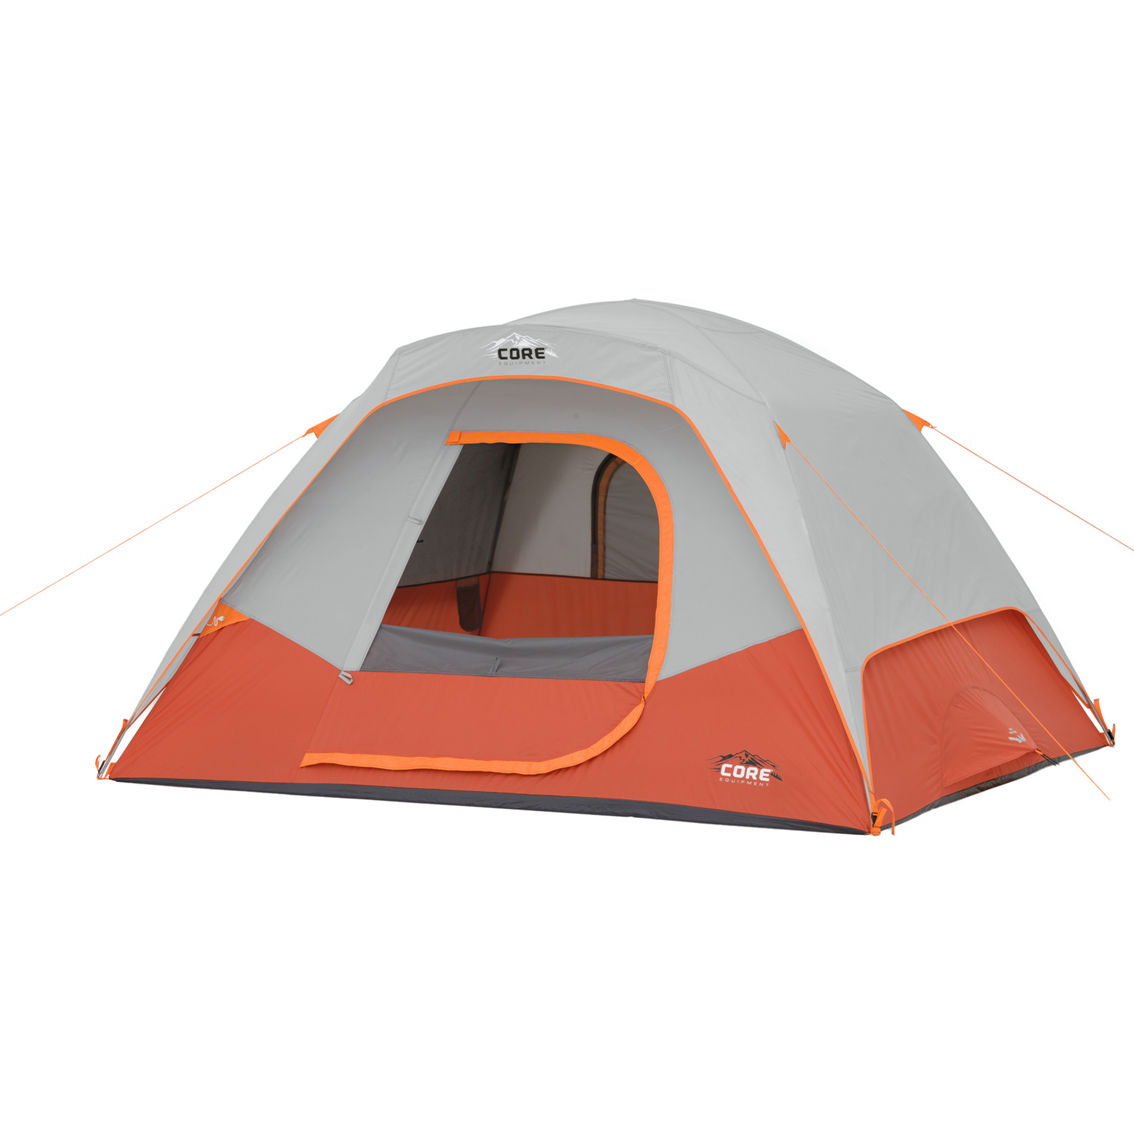 Core Equipment 6 Person Dome Tent - Image 2 of 6